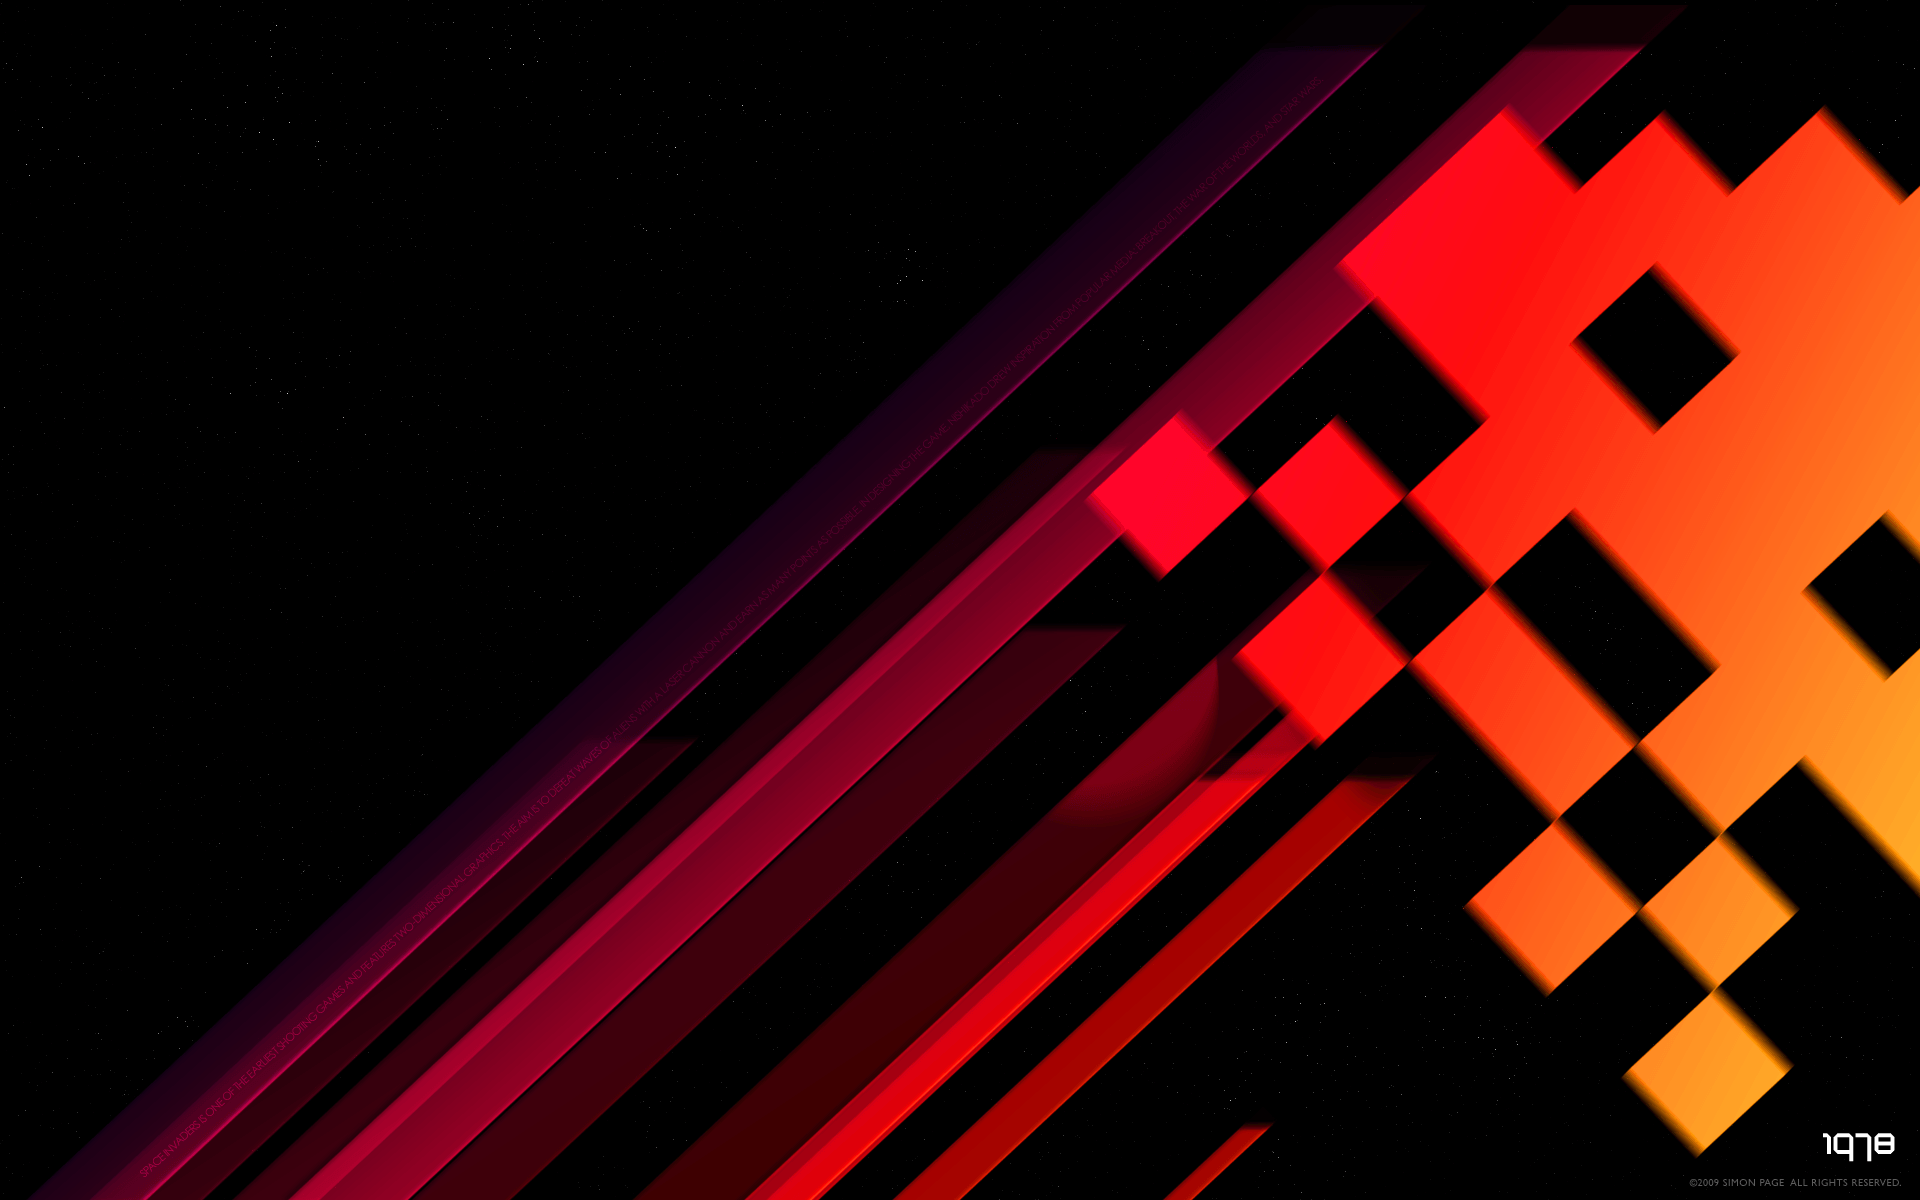 Space Invaders inspired wallpaper. Retro Gaming